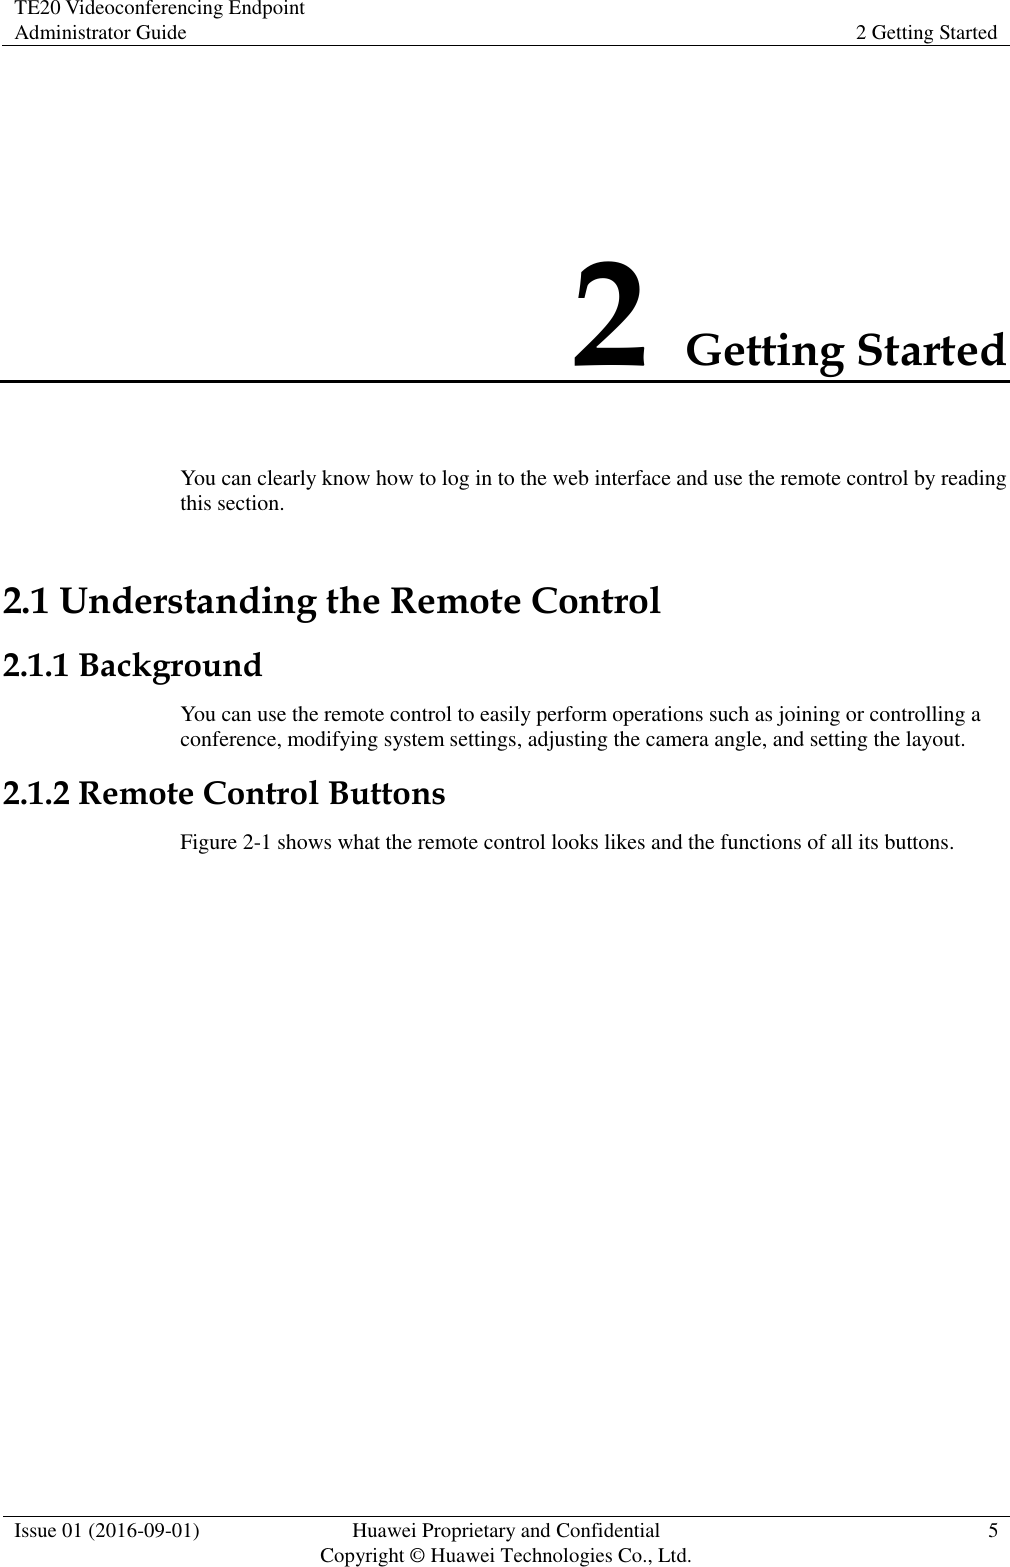 TE20 Videoconferencing Endpoint Administrator Guide 2 Getting Started  Issue 01 (2016-09-01) Huawei Proprietary and Confidential                                     Copyright © Huawei Technologies Co., Ltd. 5  2 Getting Started You can clearly know how to log in to the web interface and use the remote control by reading this section. 2.1 Understanding the Remote Control 2.1.1 Background You can use the remote control to easily perform operations such as joining or controlling a conference, modifying system settings, adjusting the camera angle, and setting the layout.   2.1.2 Remote Control Buttons Figure 2-1 shows what the remote control looks likes and the functions of all its buttons. 